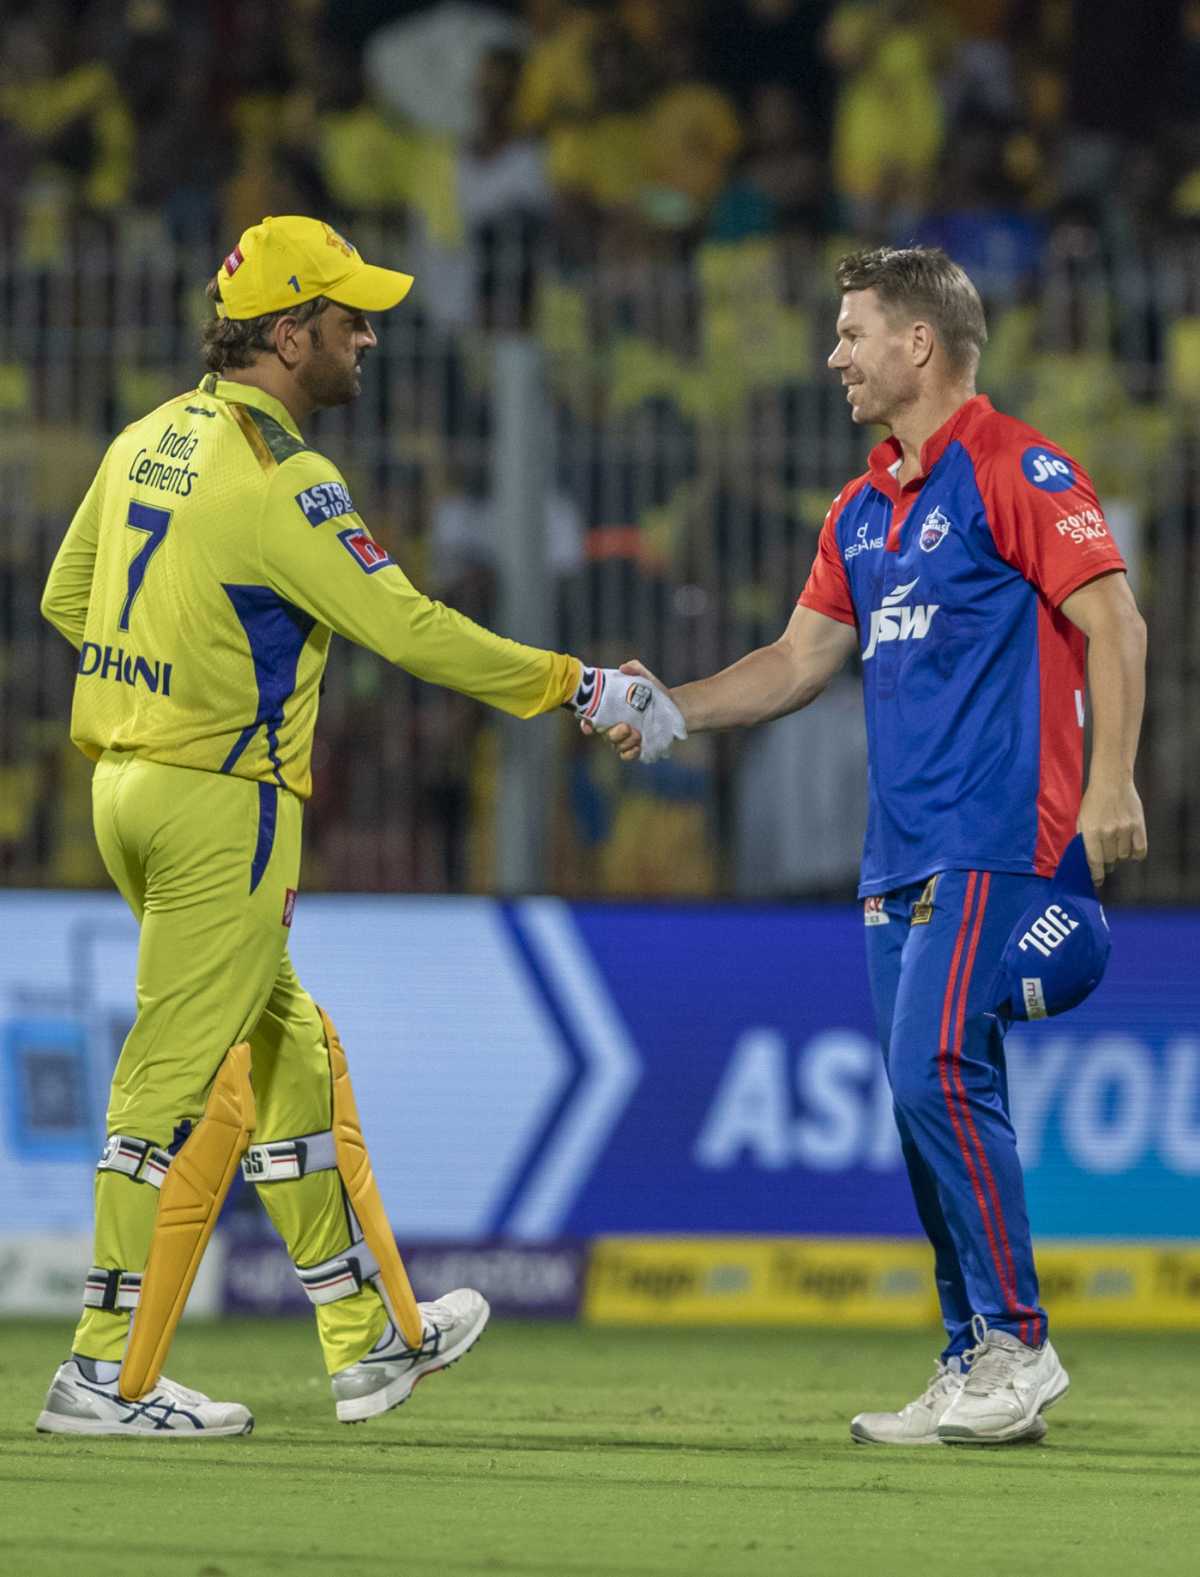 Ms Dhoni And David Warner Greet Each Other After The Game